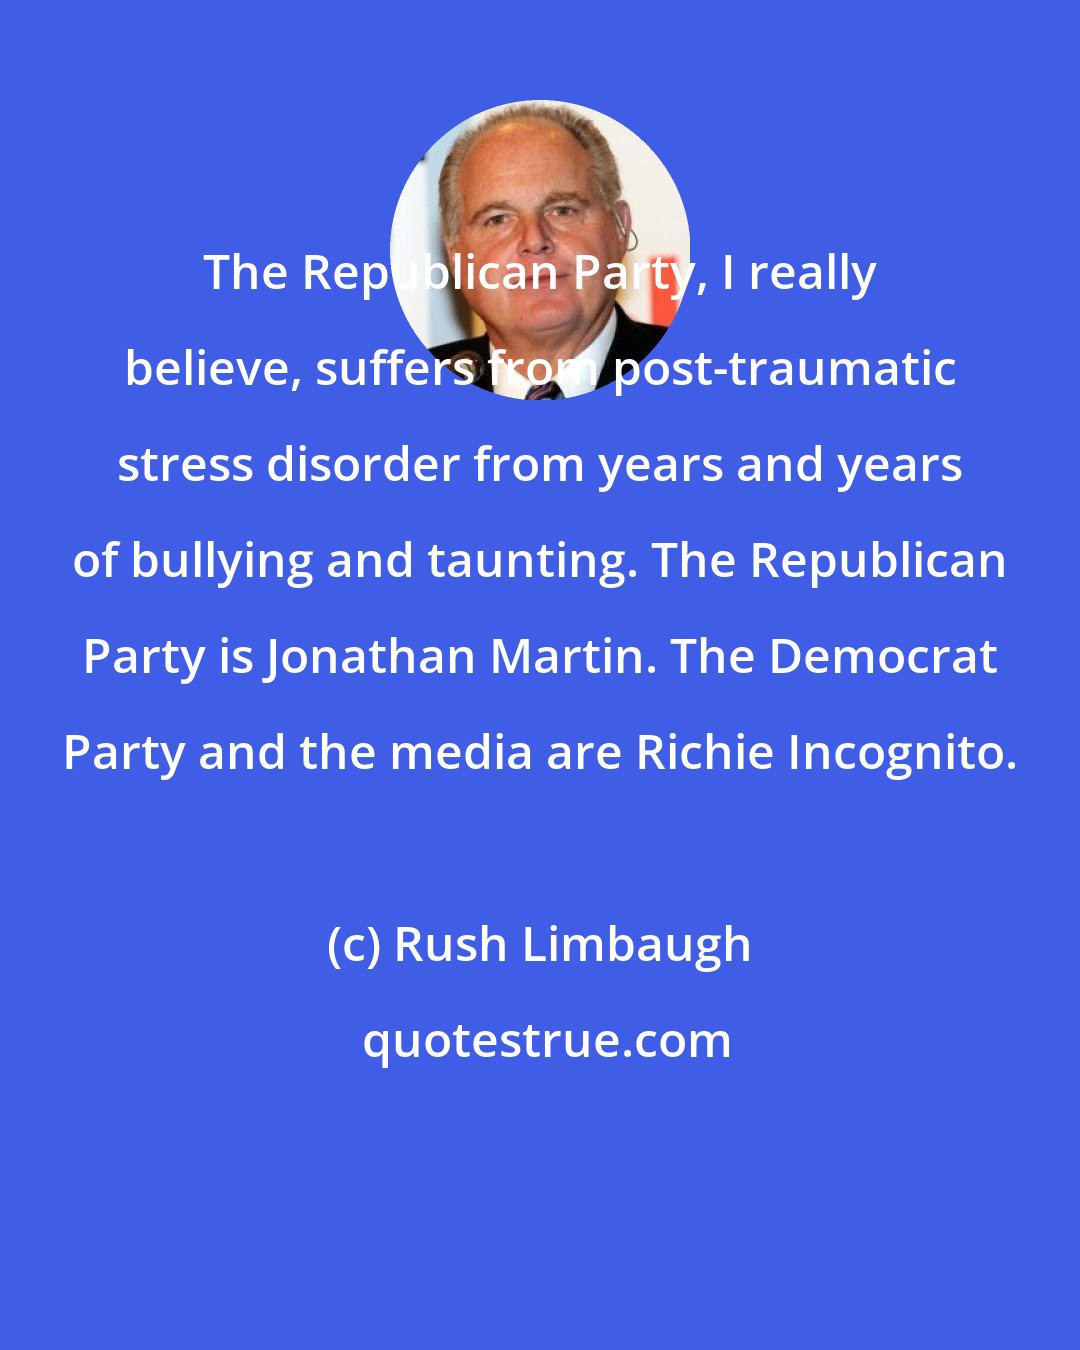 Rush Limbaugh: The Republican Party, I really believe, suffers from post-traumatic stress disorder from years and years of bullying and taunting. The Republican Party is Jonathan Martin. The Democrat Party and the media are Richie Incognito.